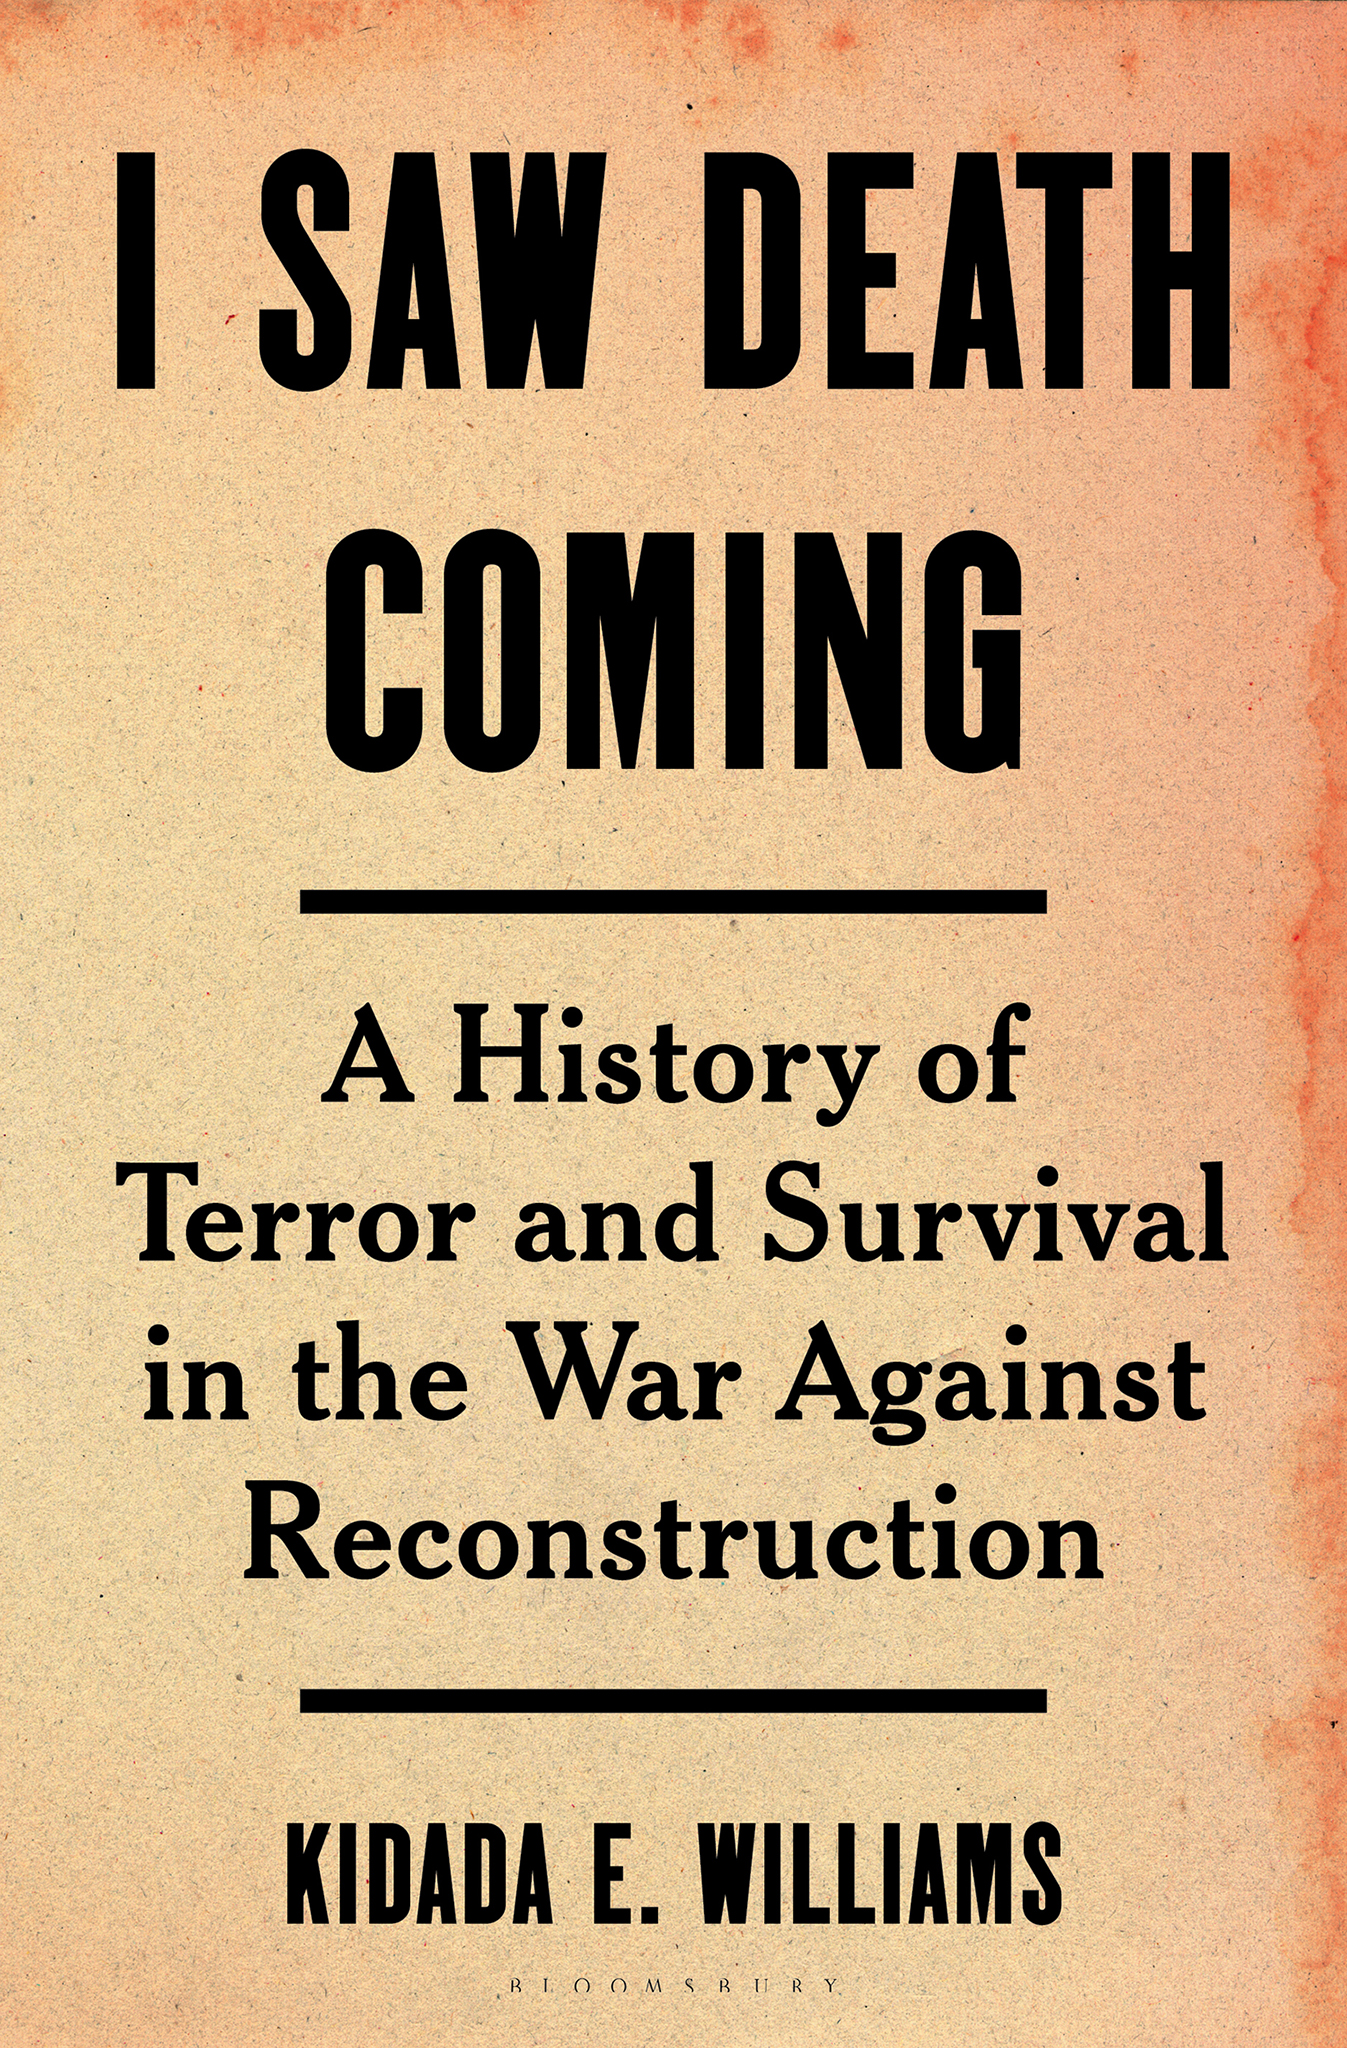 I Saw Death Coming book cover 